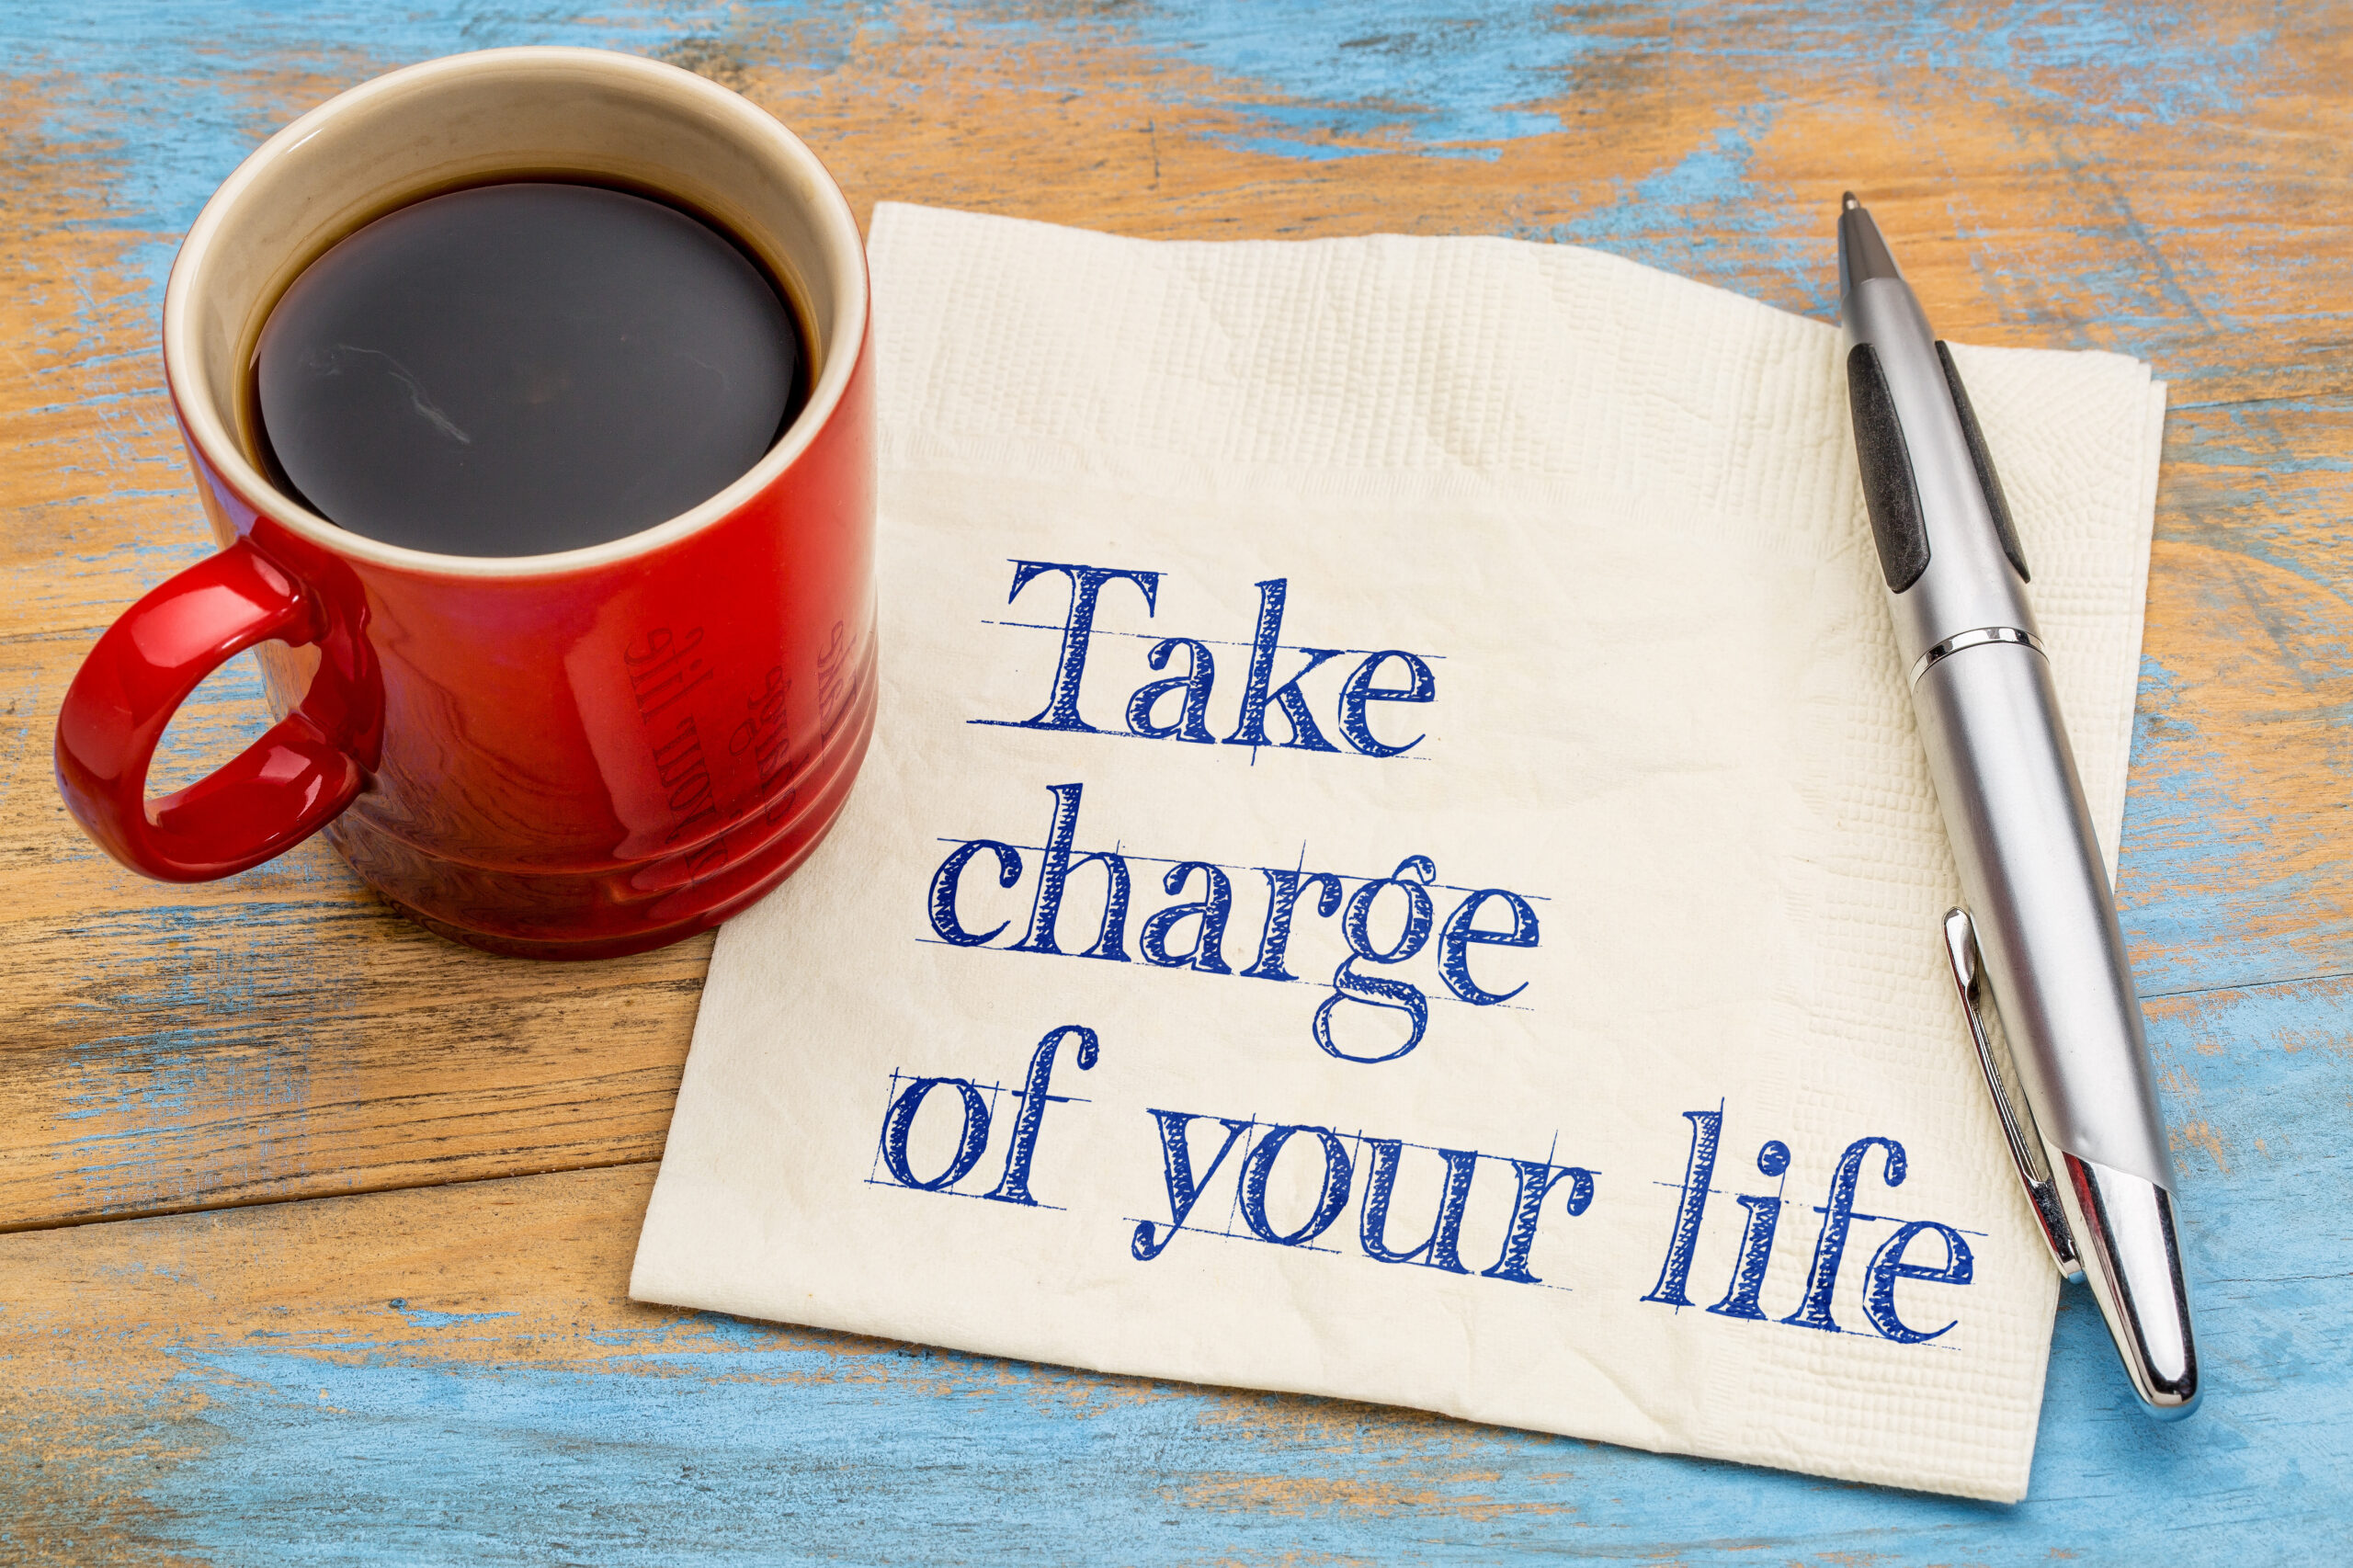 A coffee cup sitting next to a note that reads "Take charge of your life"